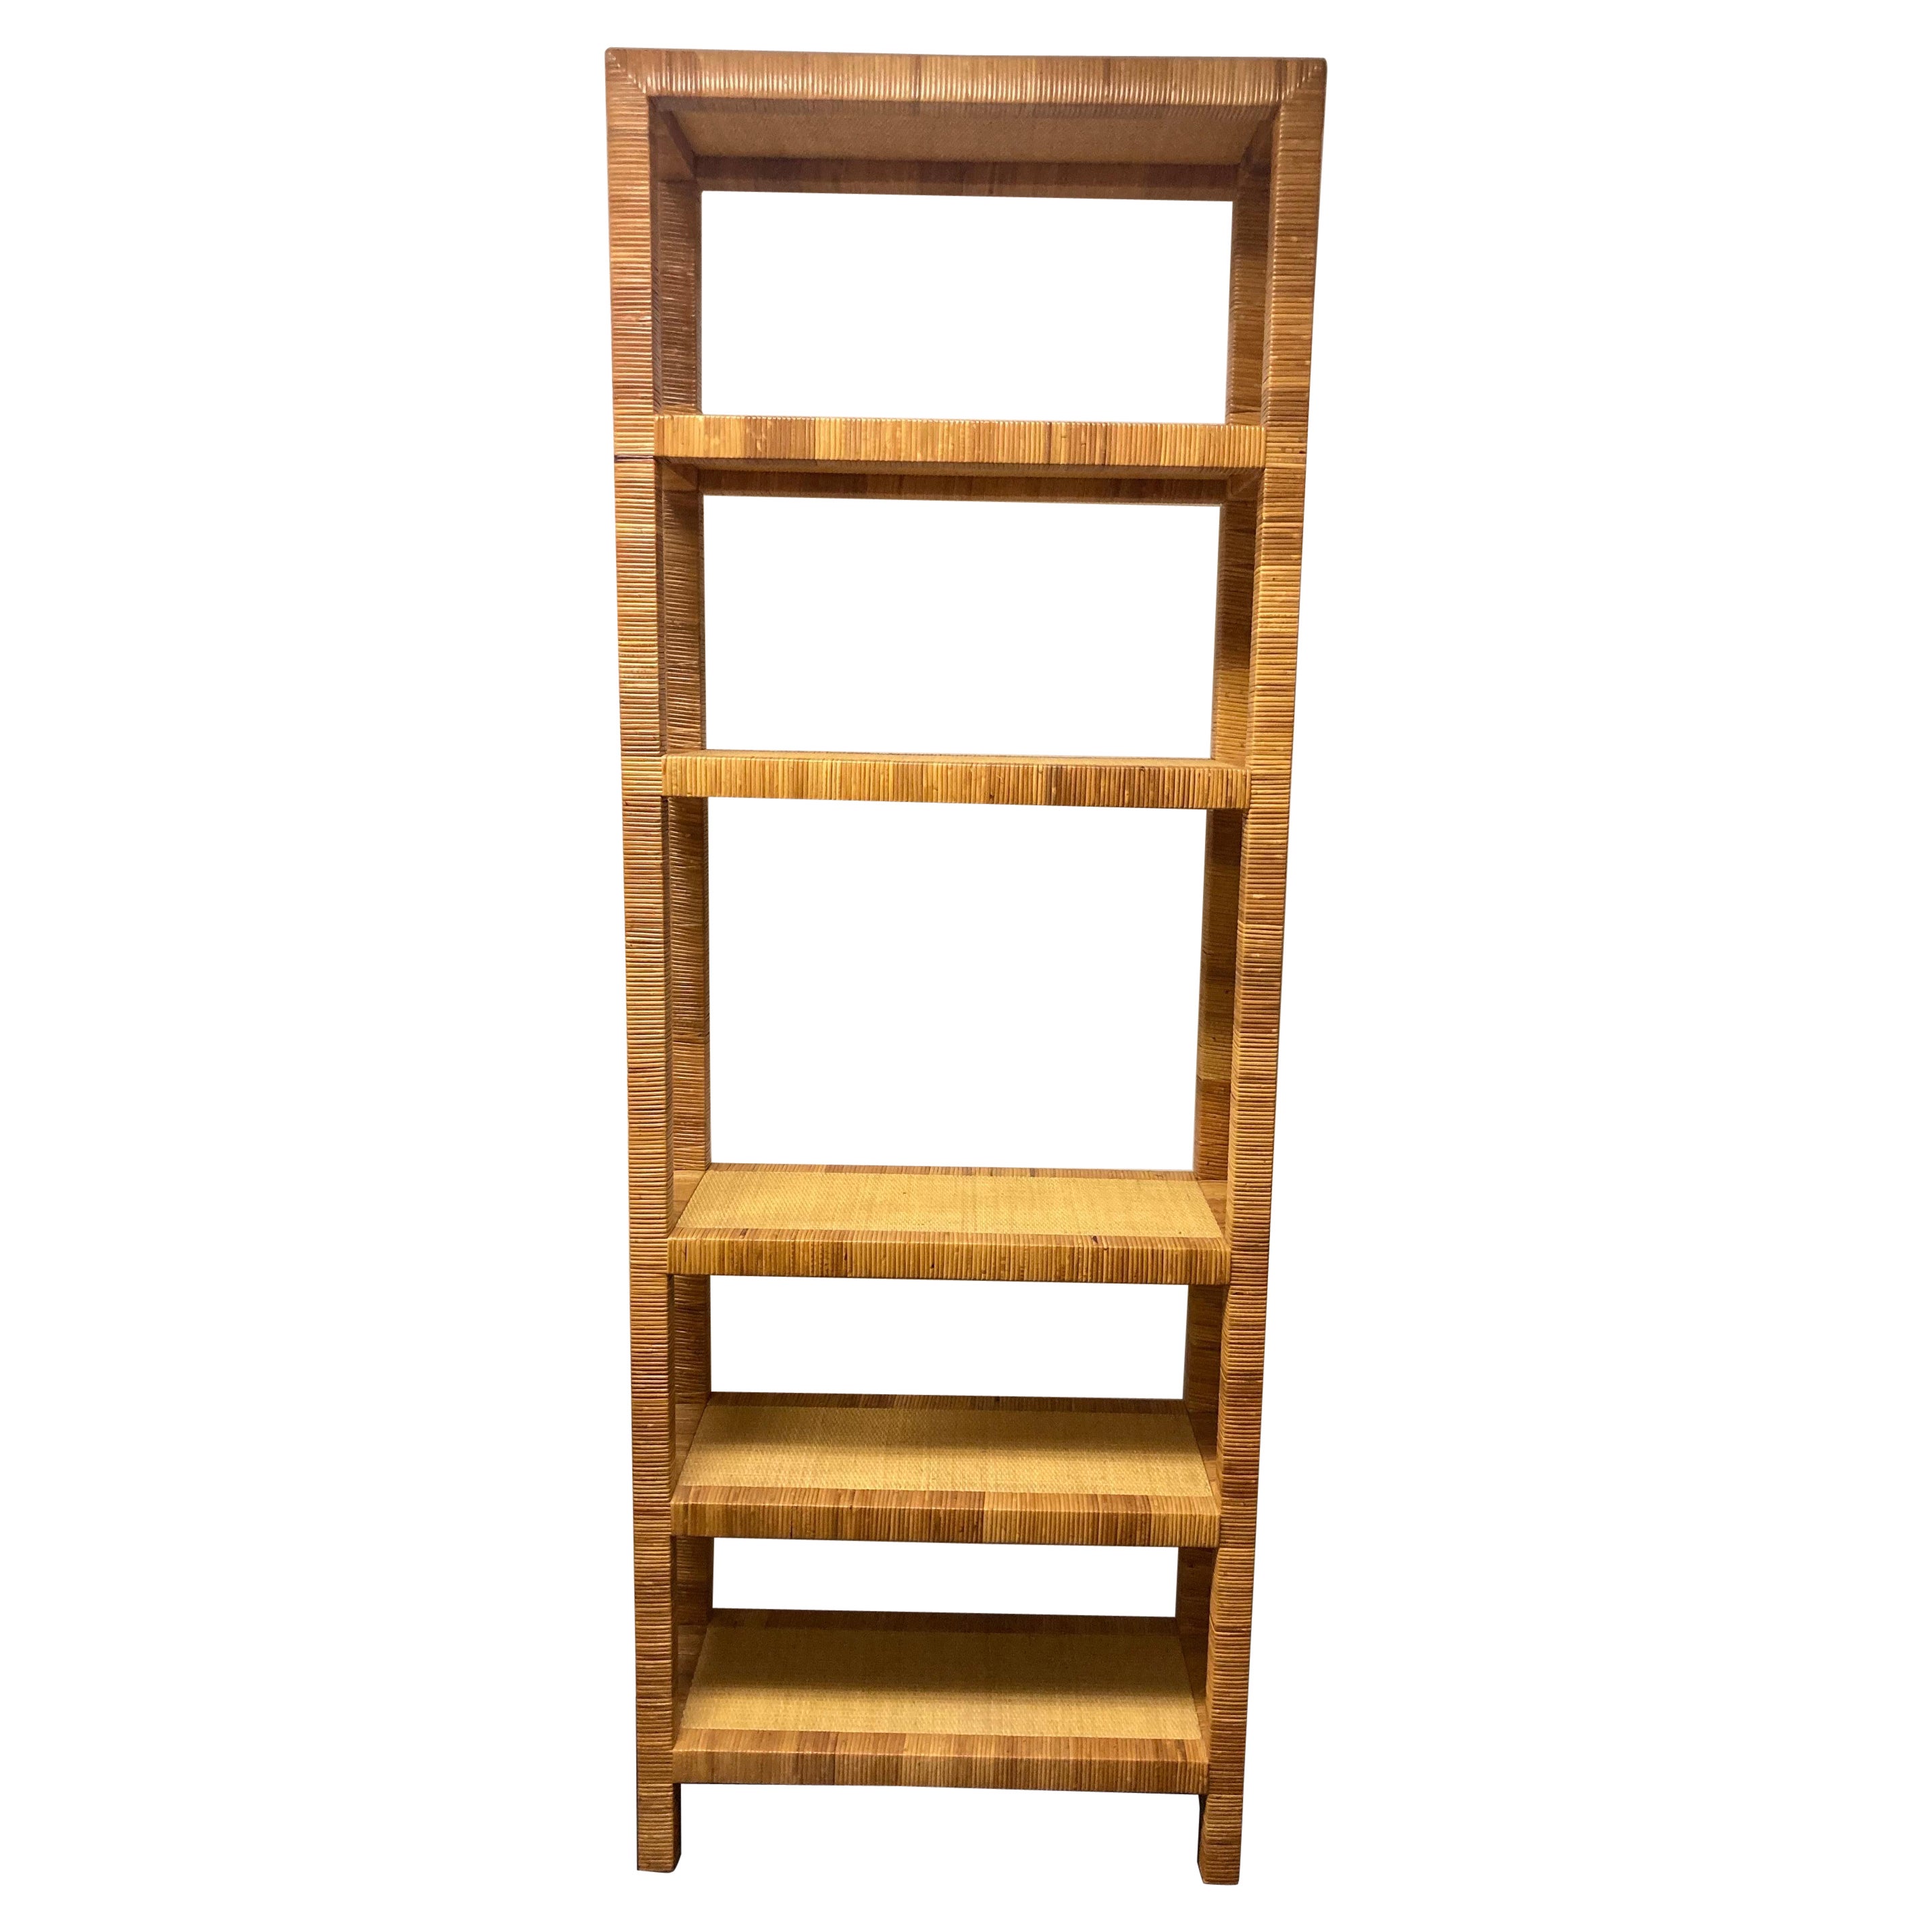 Bielecky Brothers Cane and Rattan Etagere